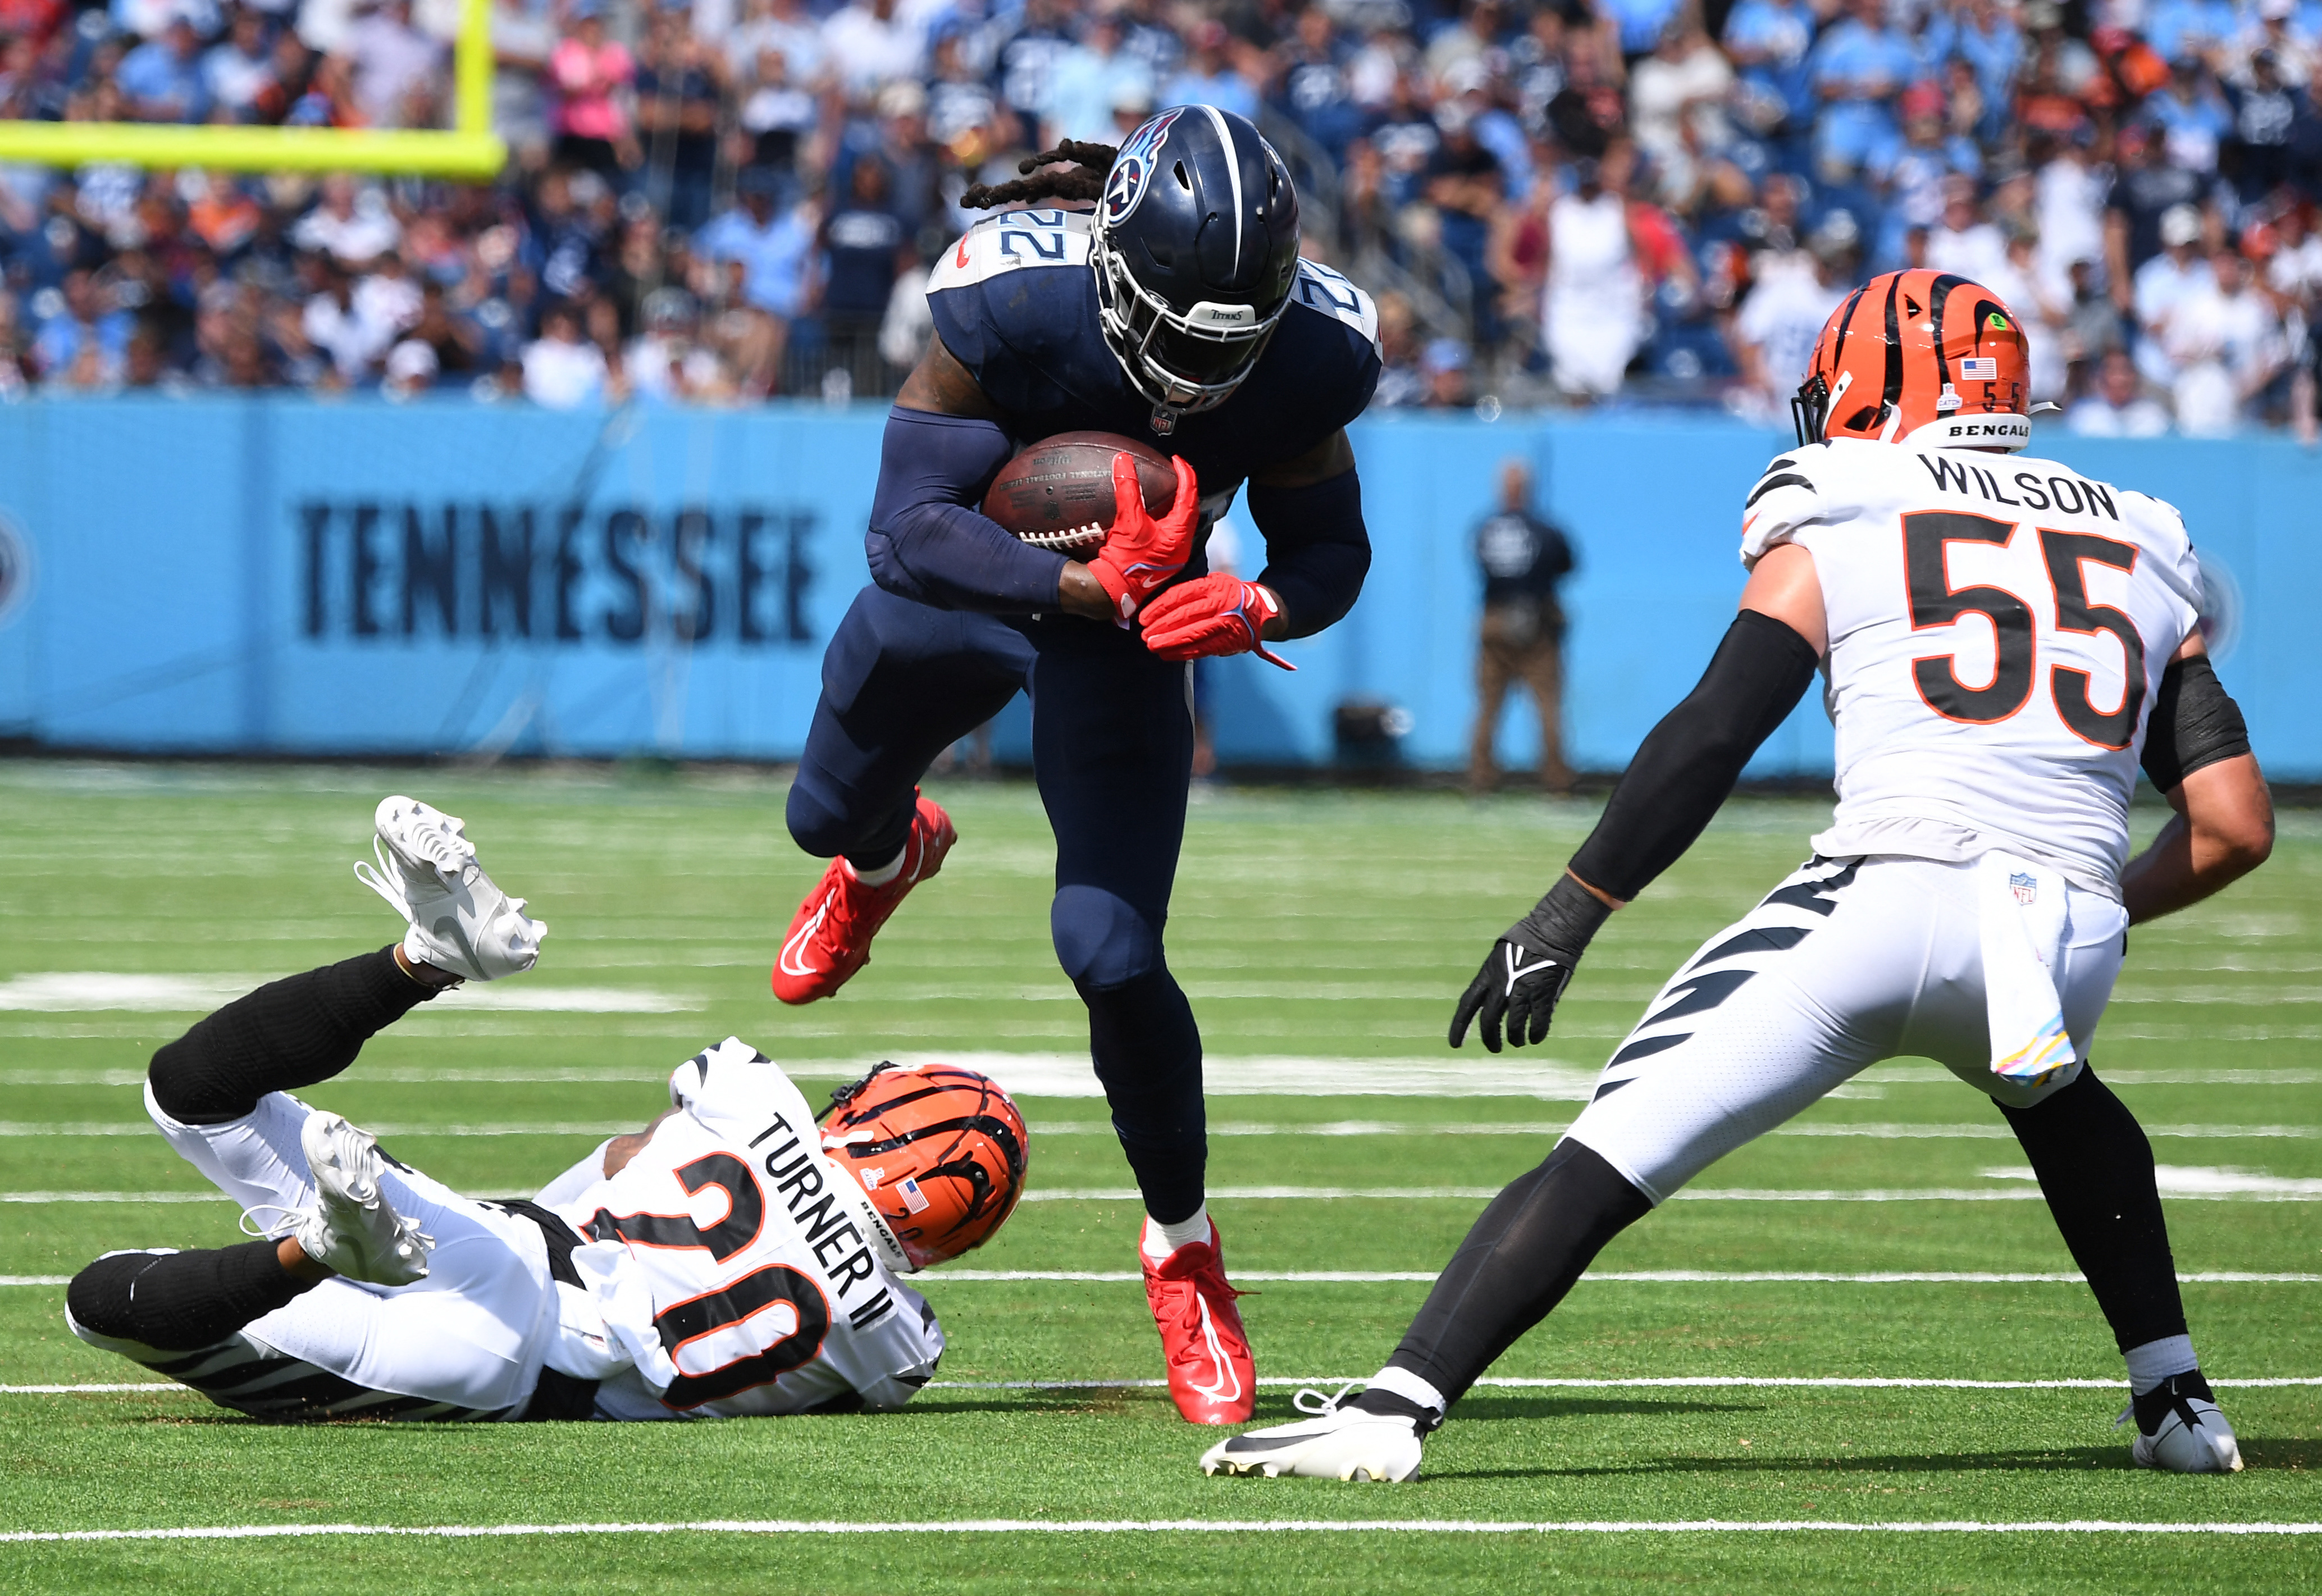 Henry runs for TD, throws for score as Titans rout Burrow, Bengals 27-3